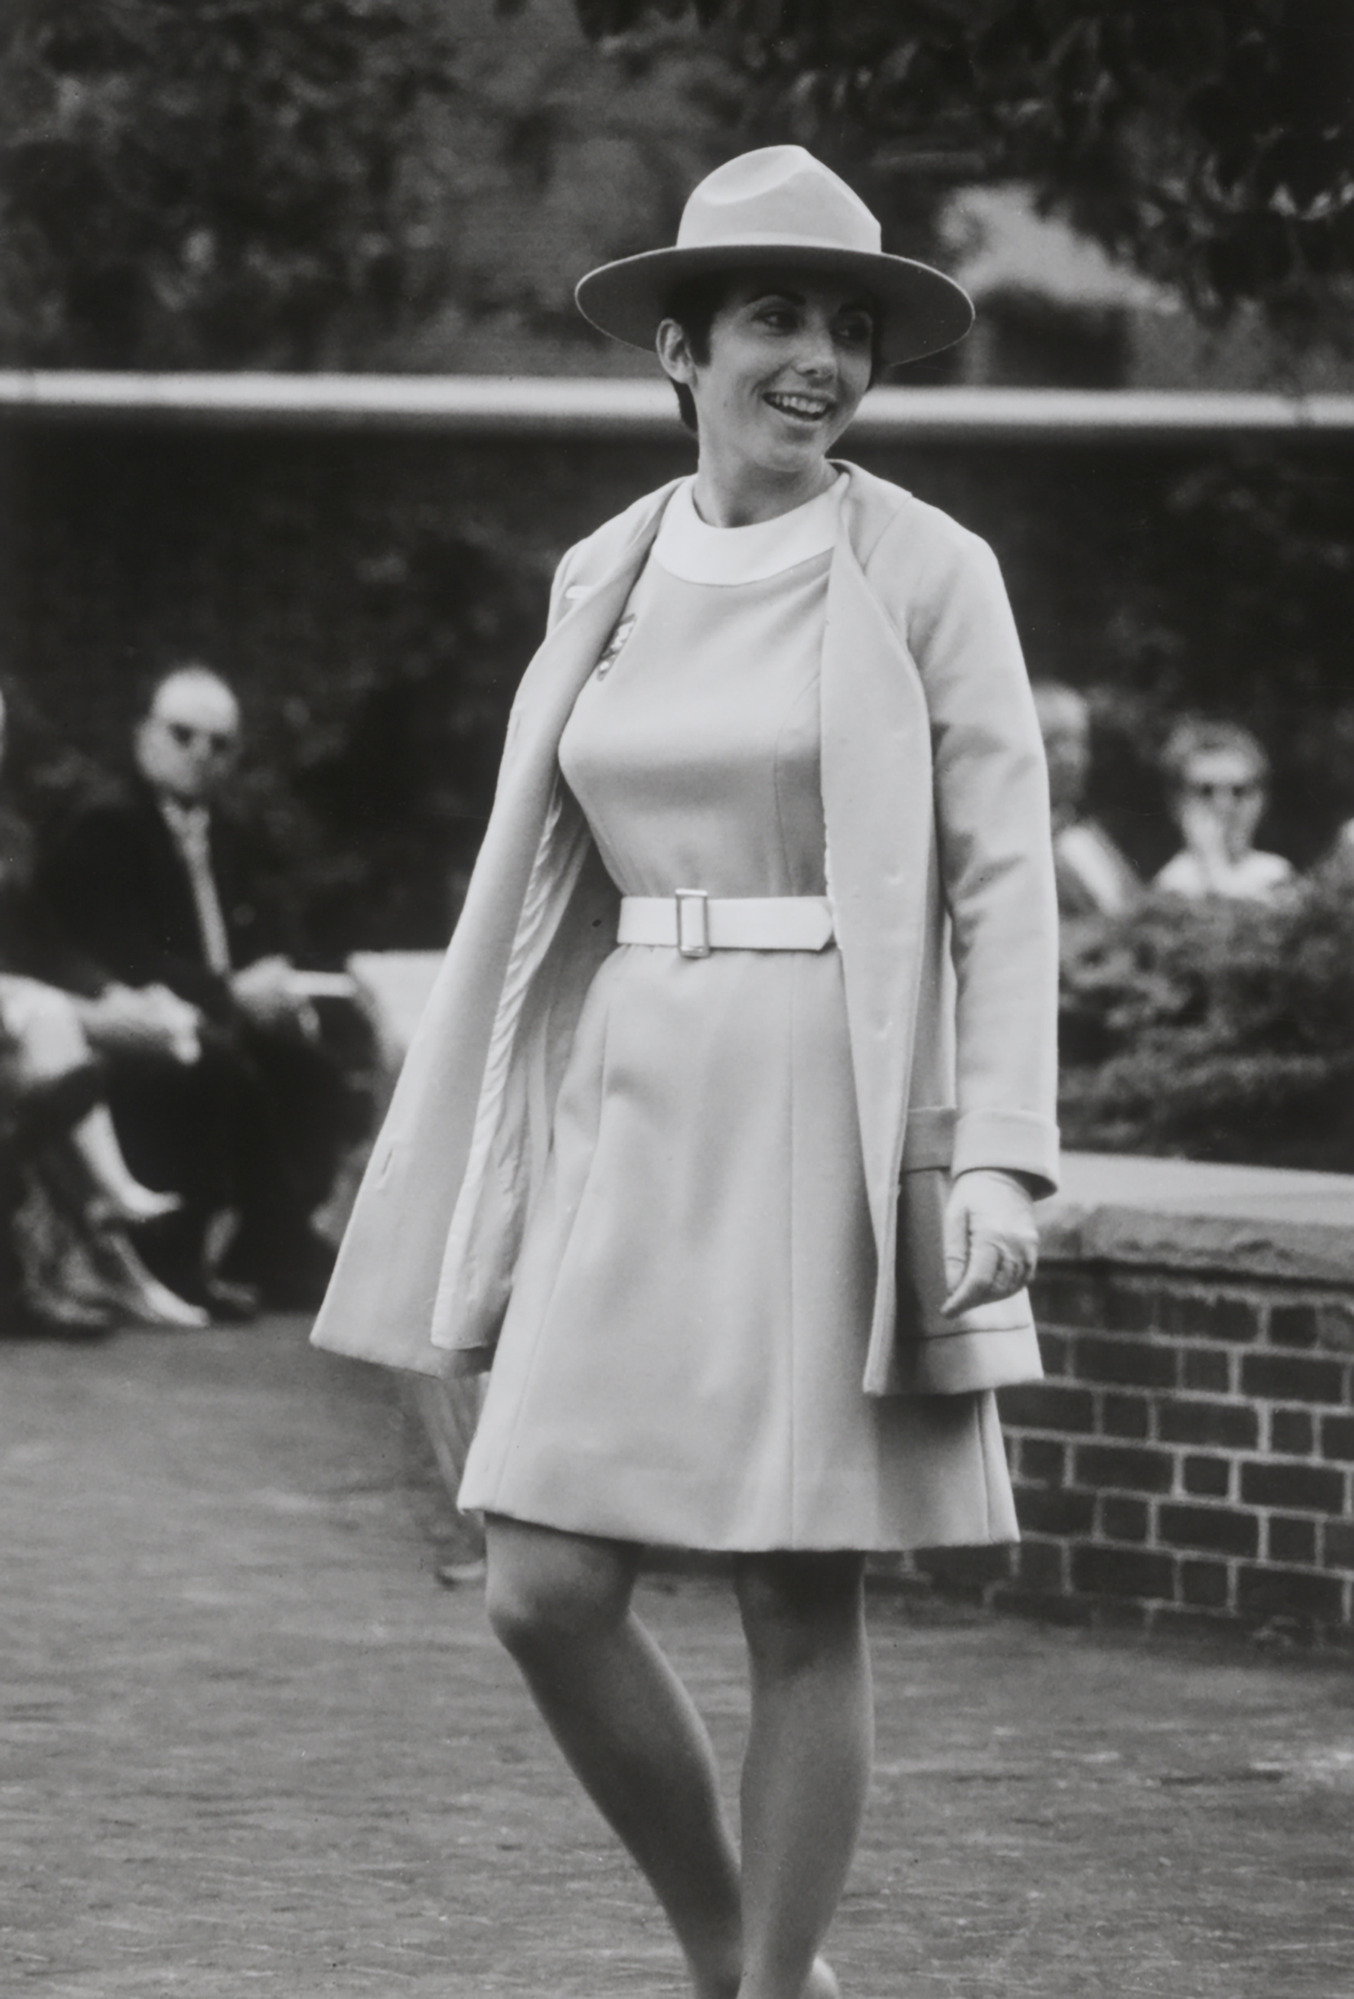 Carole Scanlon modeling the 1970 belted dress and matching jacket with the women's broad-brimmed hat.